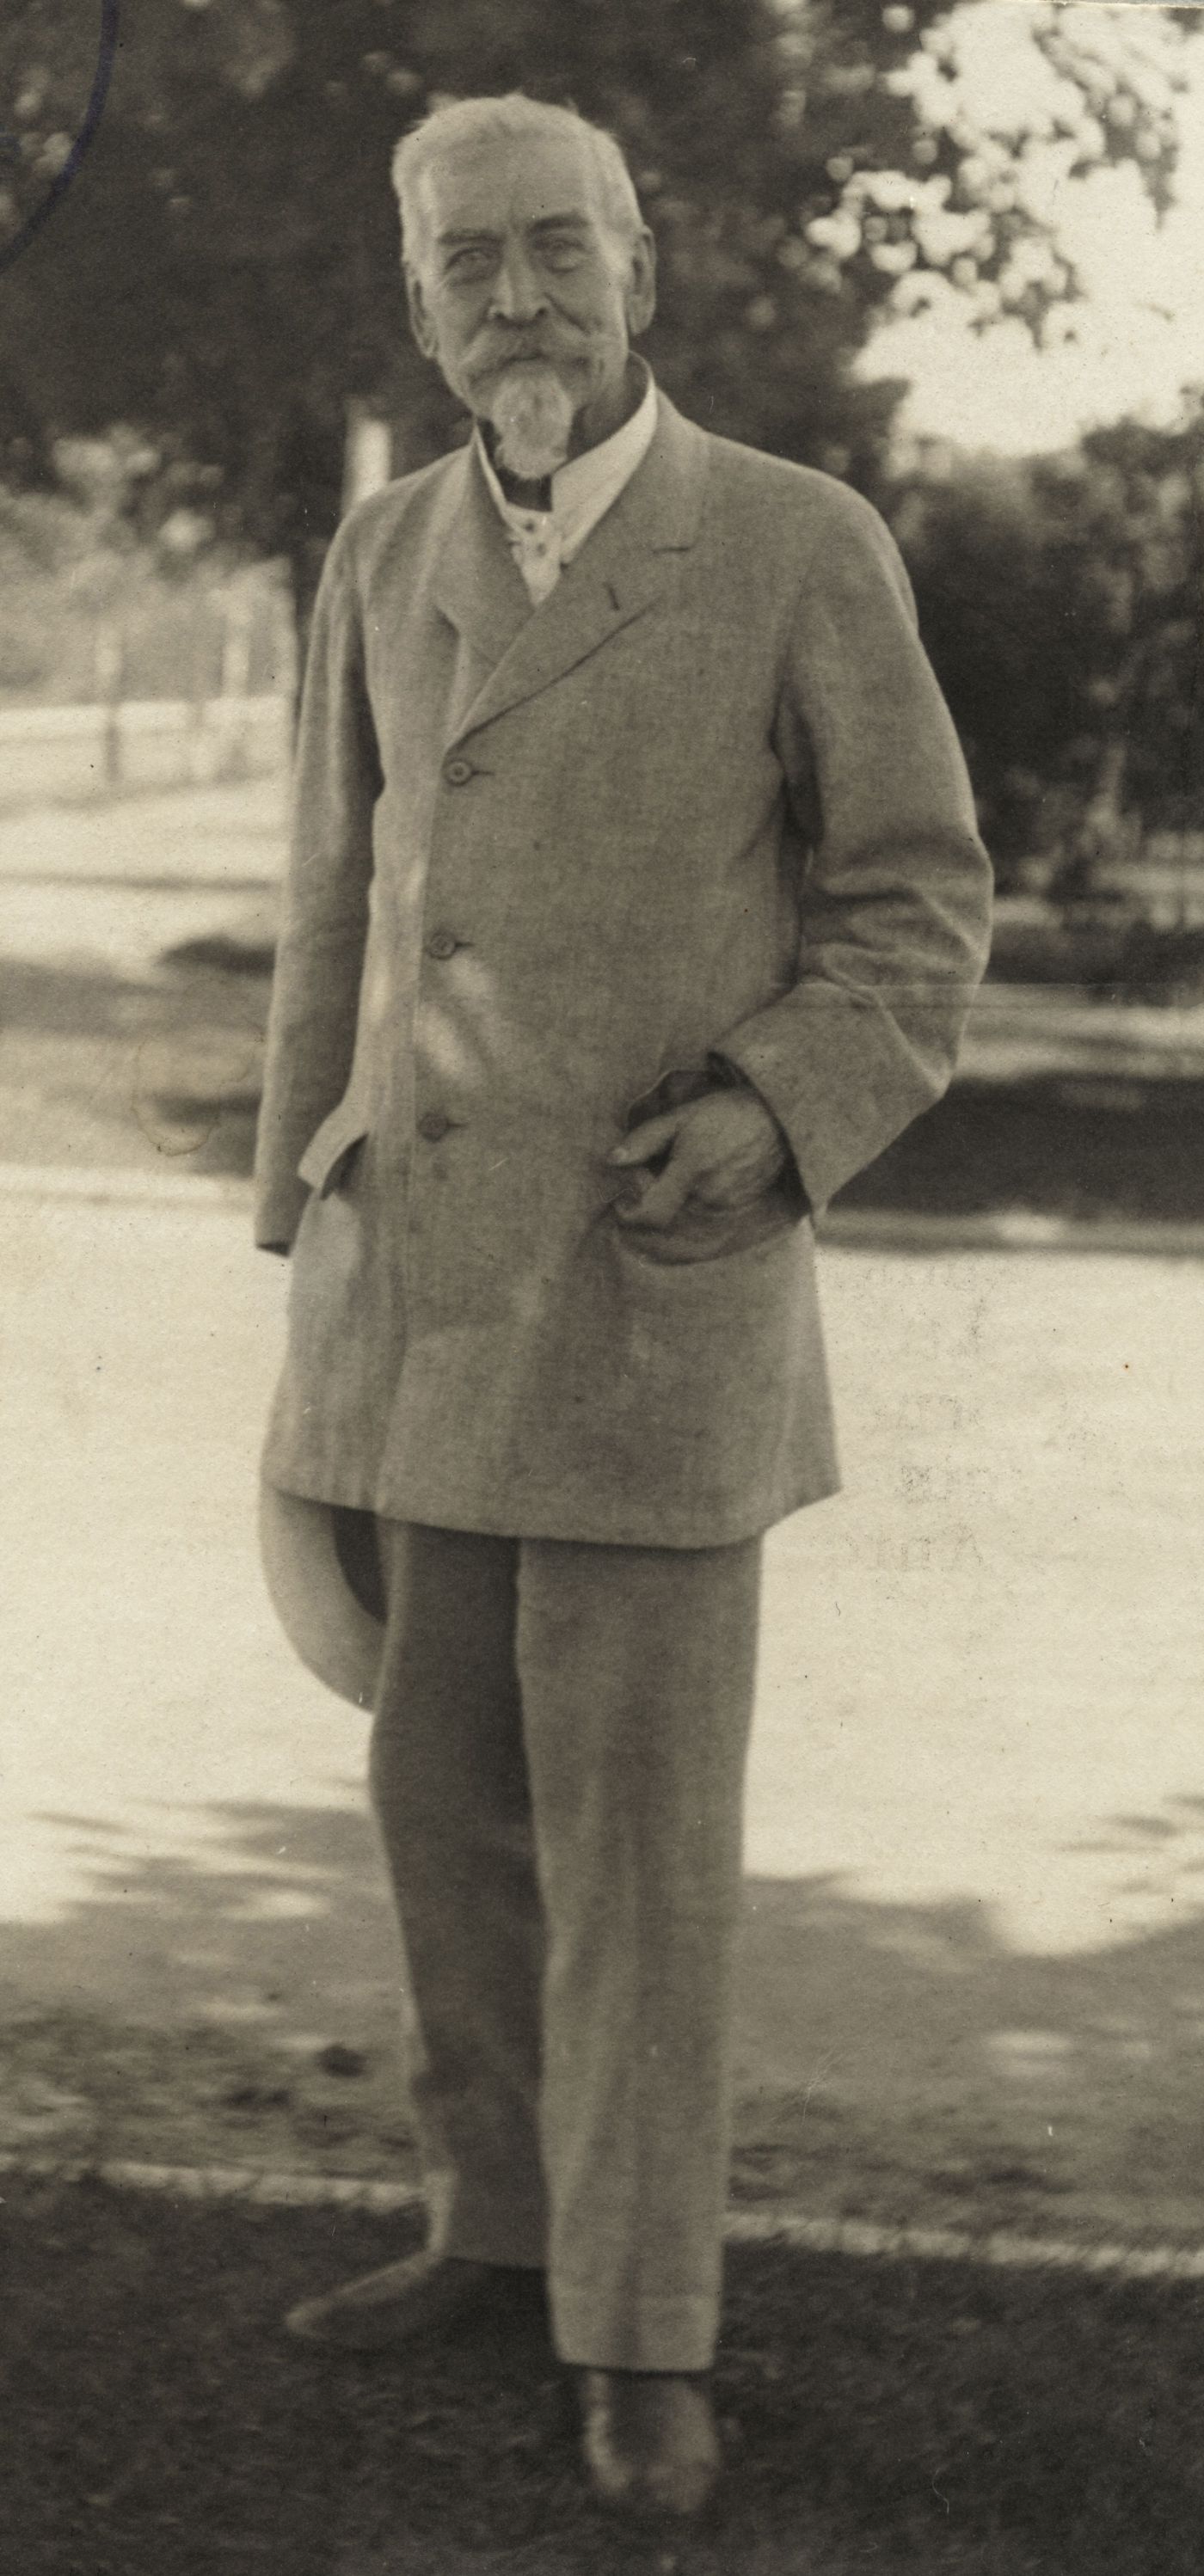 Sepia photograph of an elderly man with white hair, mustache and beard, dressed in a pale suit. He stands at the edge of a tree-lined street, one hand in a pocket, the other holding a hat.